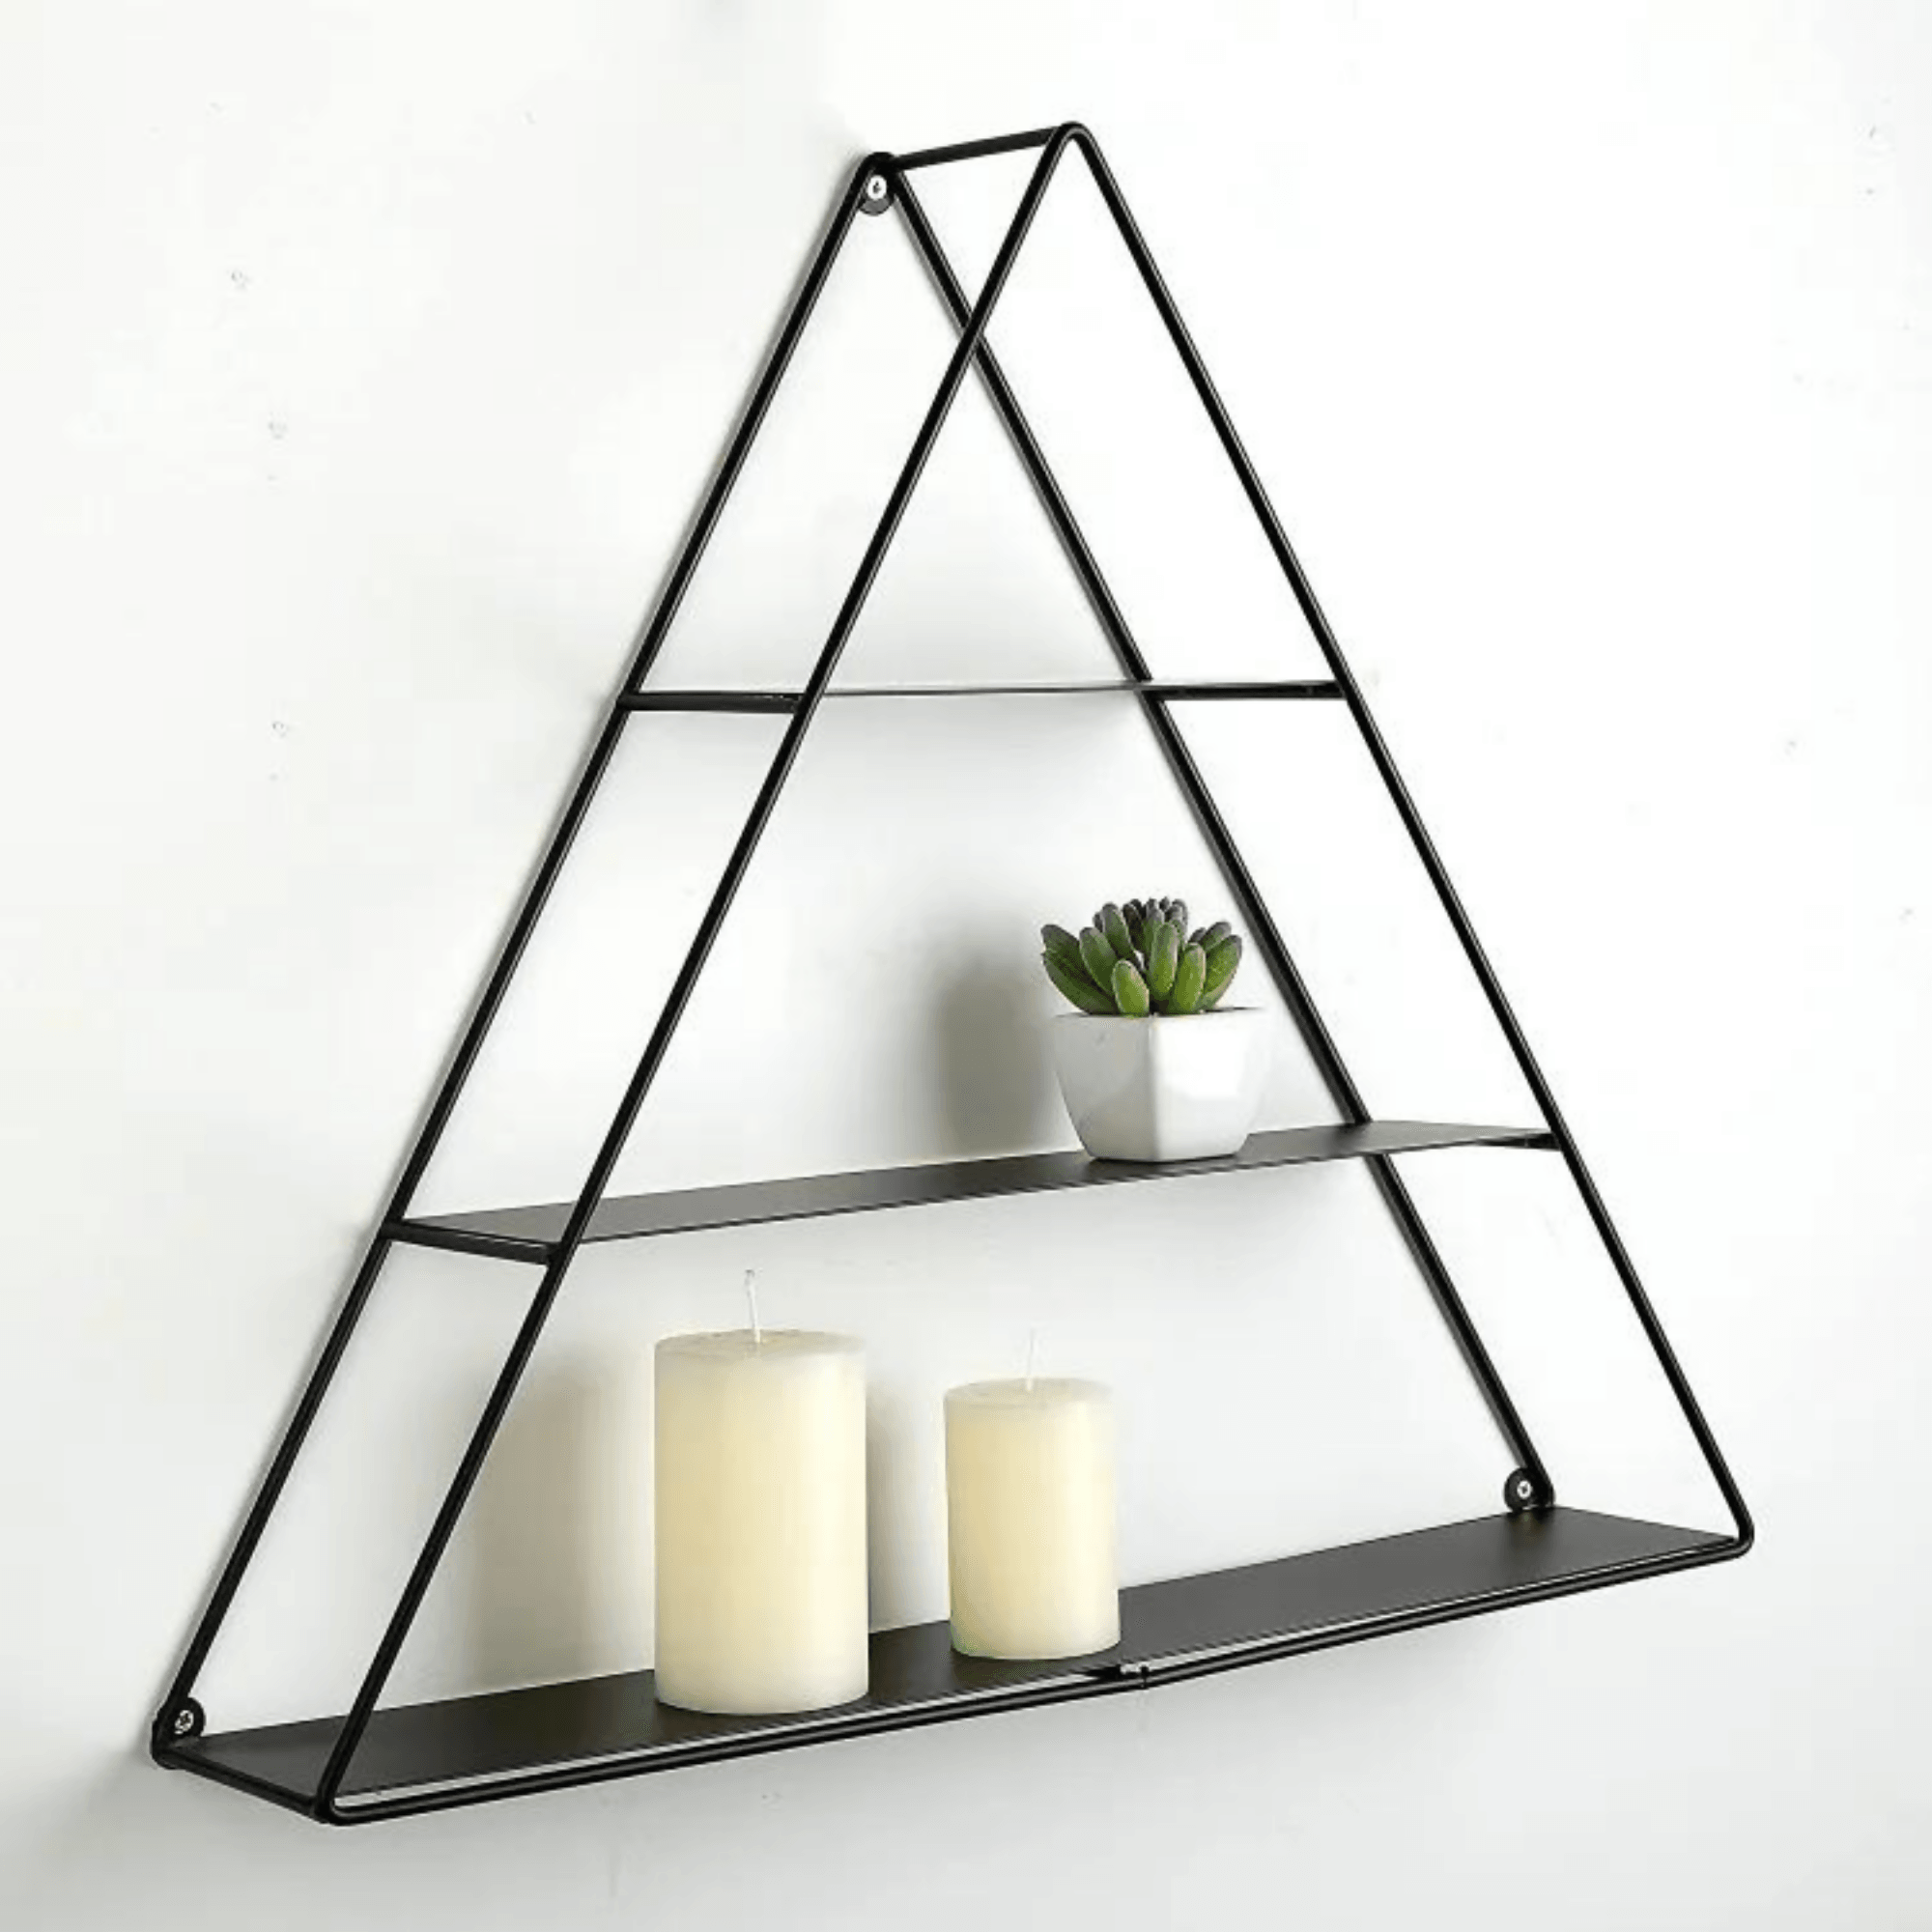 Triangular 3 Tier Decorative Display Shelf for Collectibles and Crystals - ValueBox